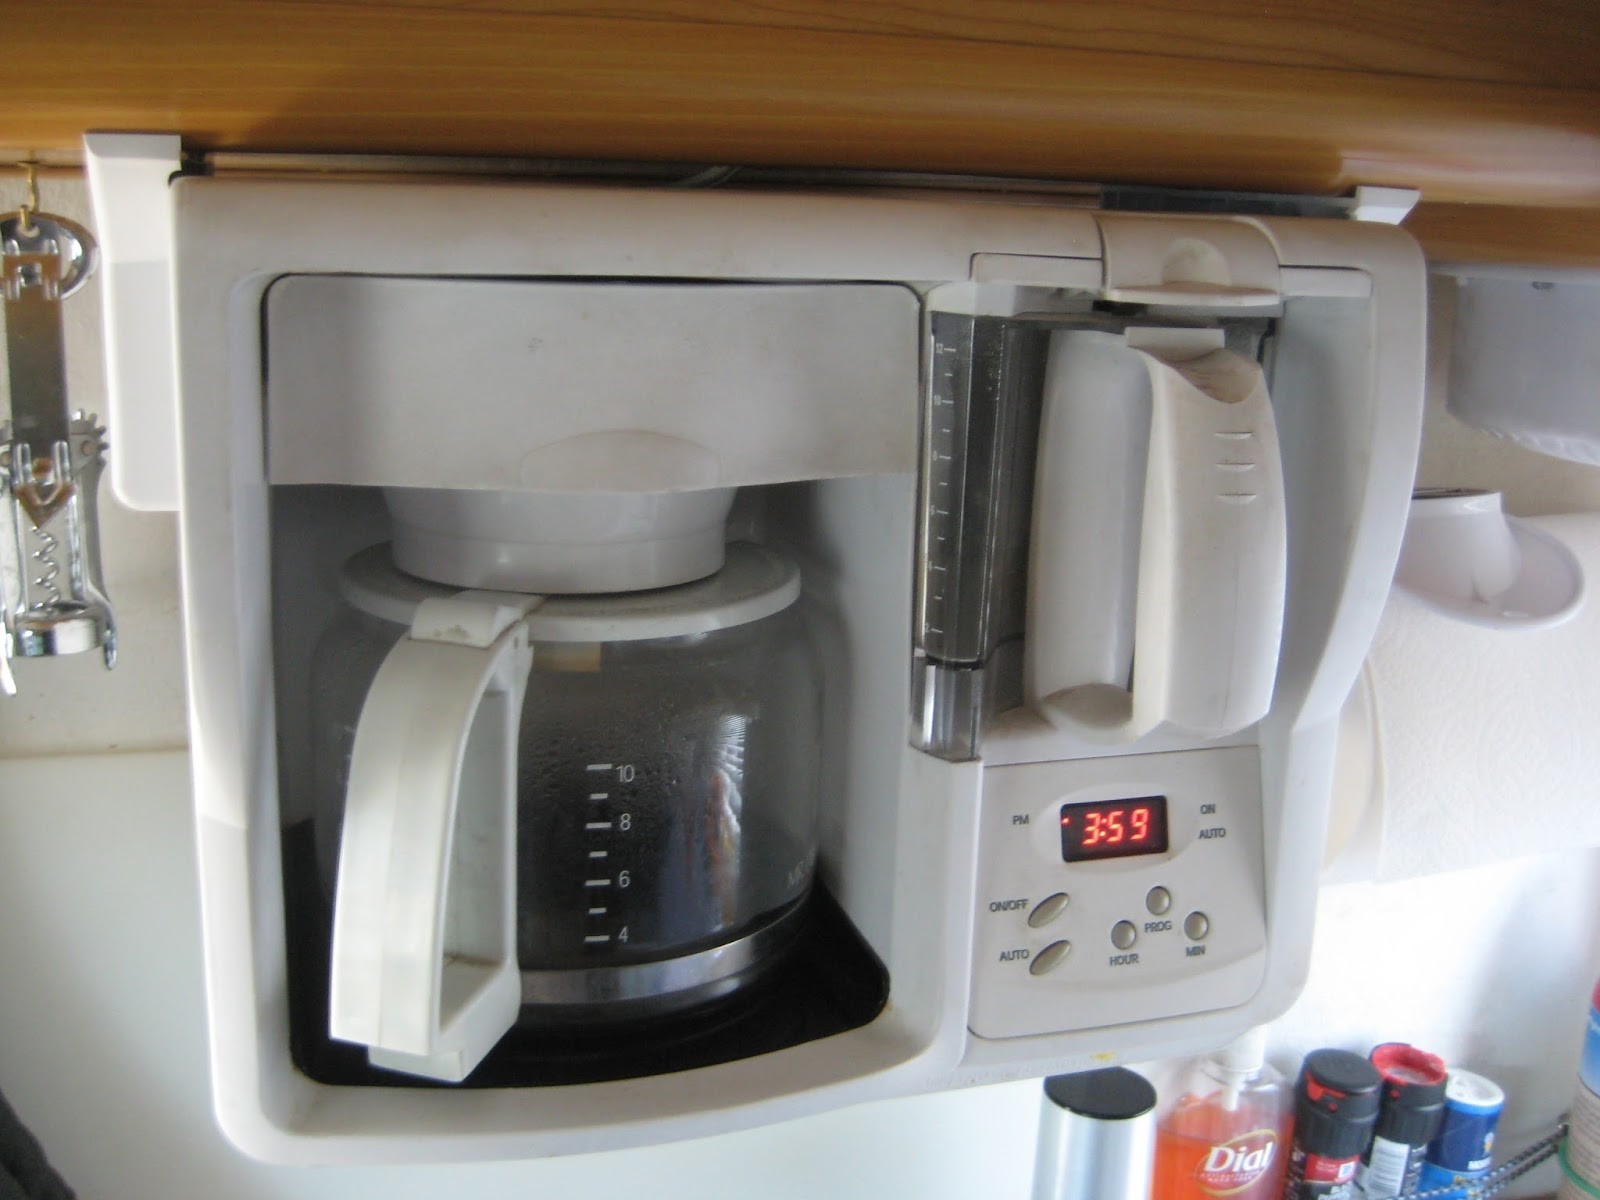 space saver coffee maker black and decker